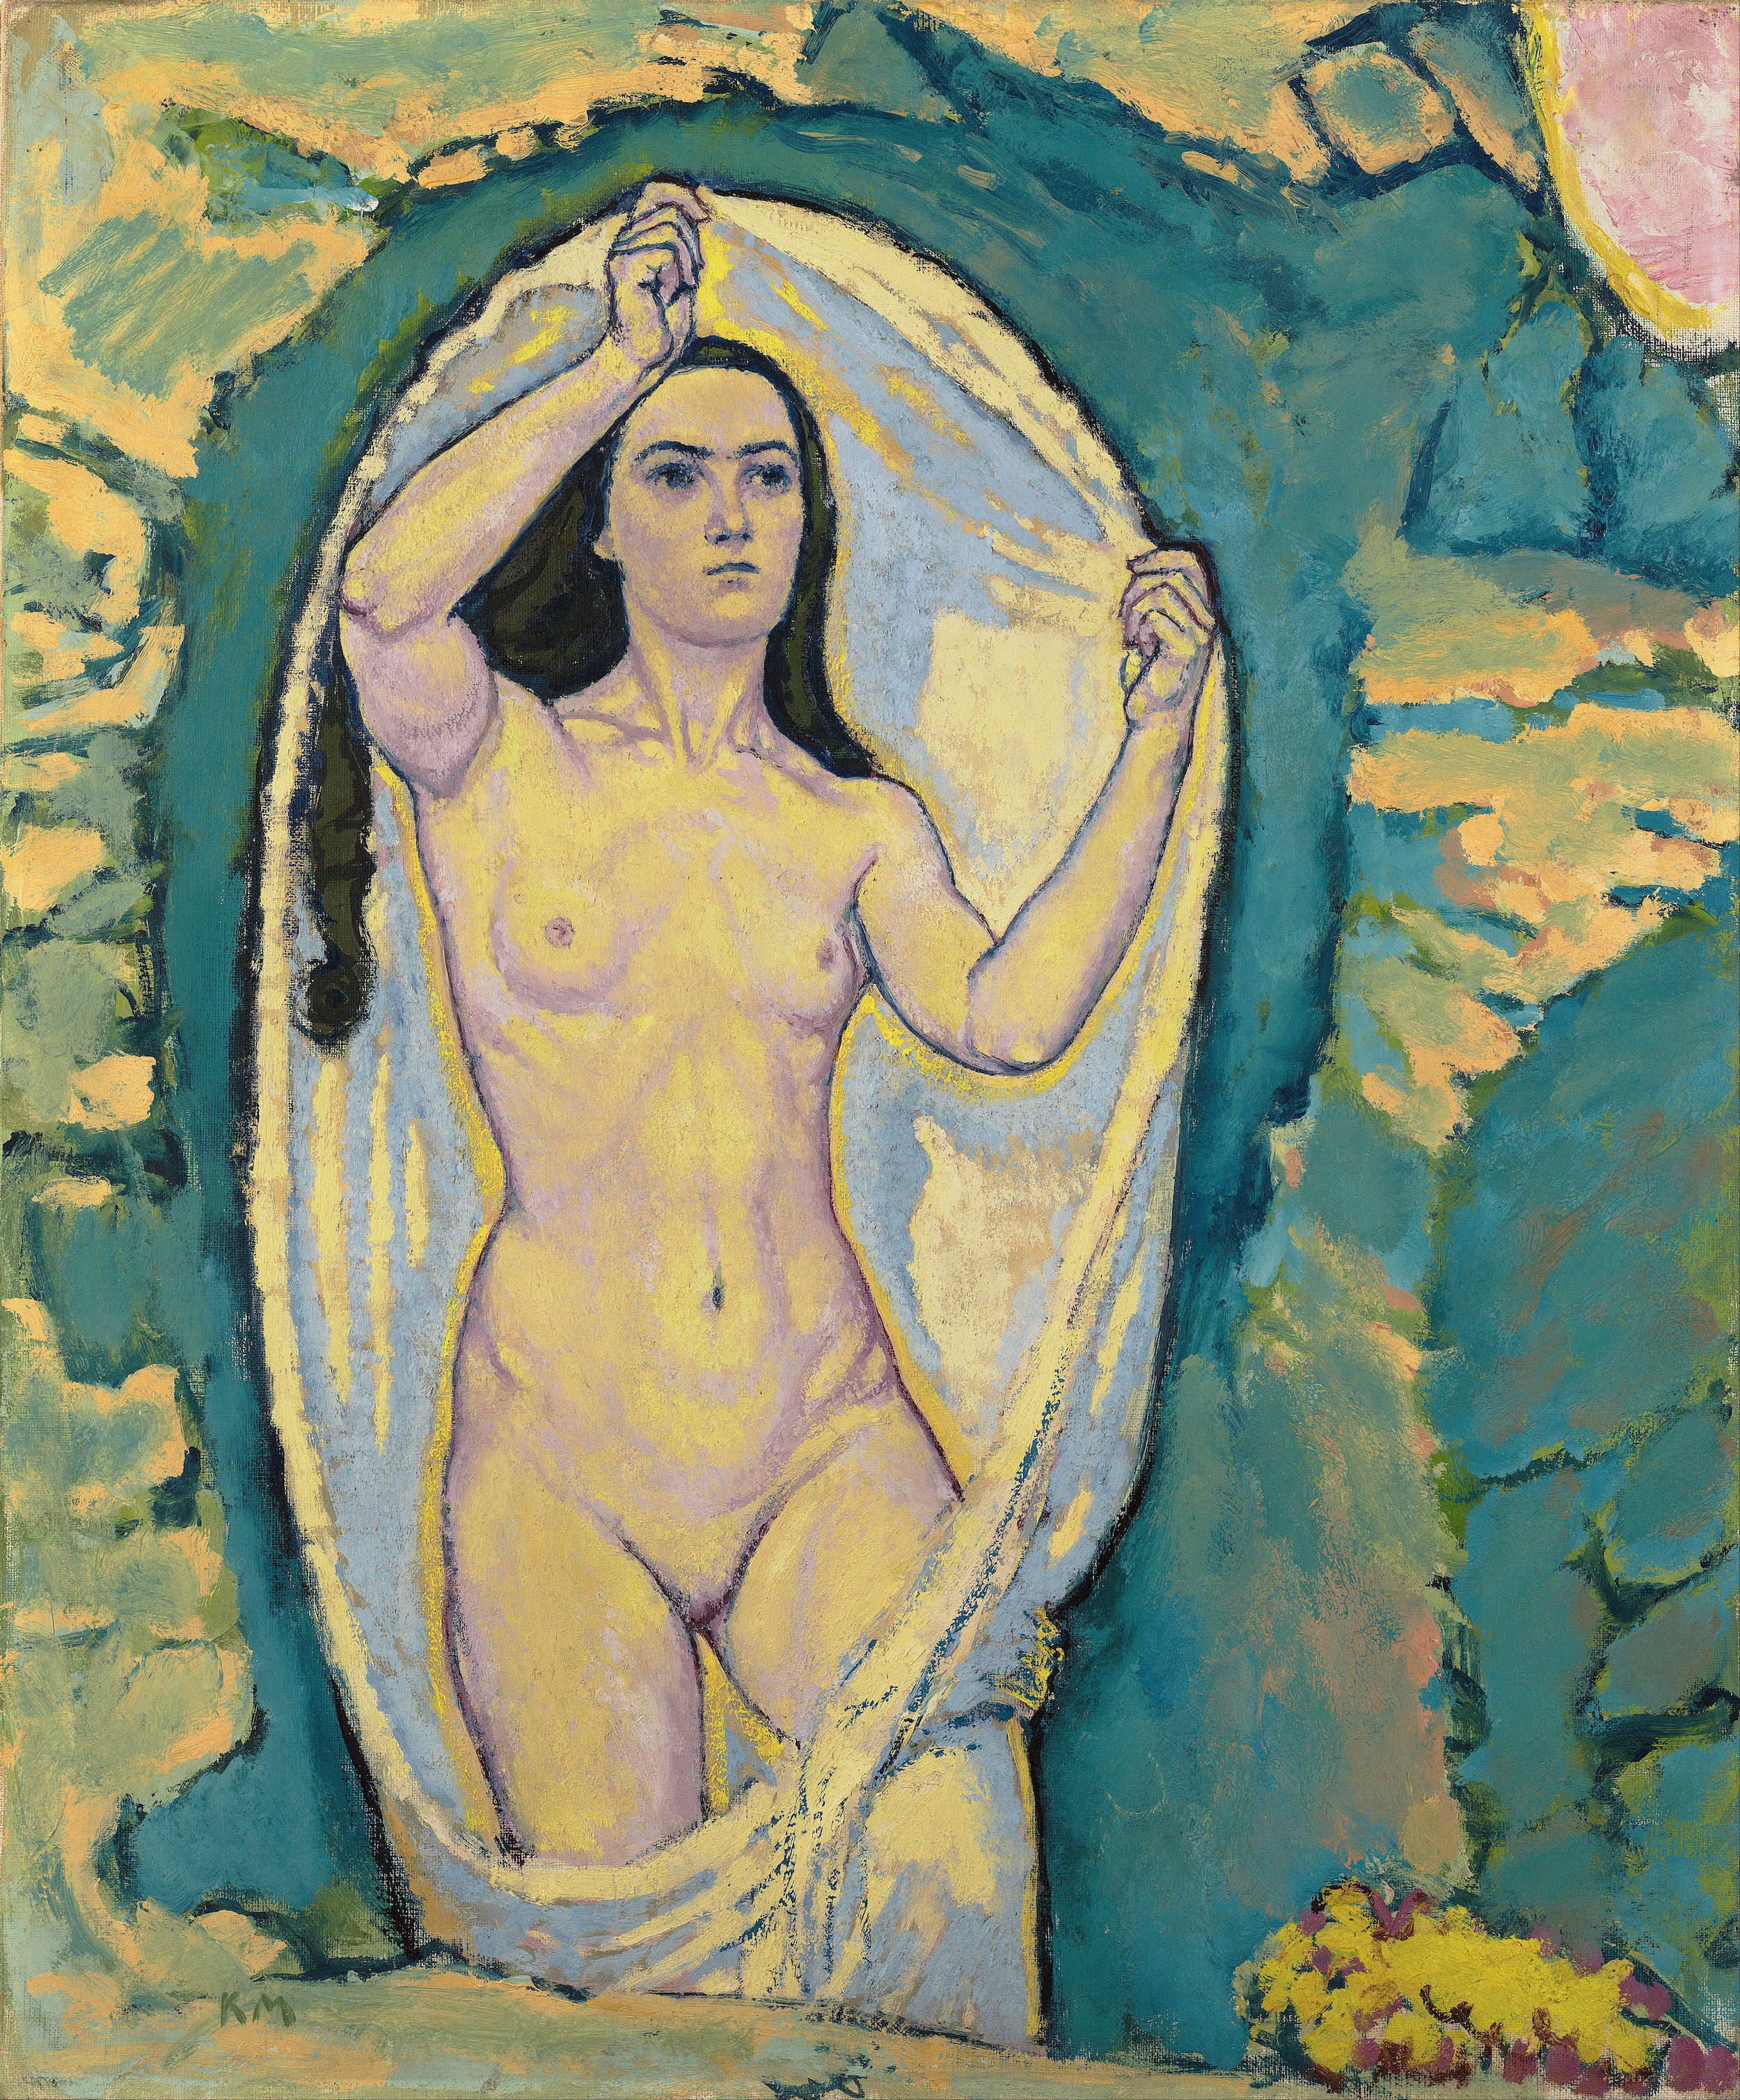 Venus in the Grotto by Koloman Moser - 1914 - 62.7 x 75.5 cm Leopold Museum